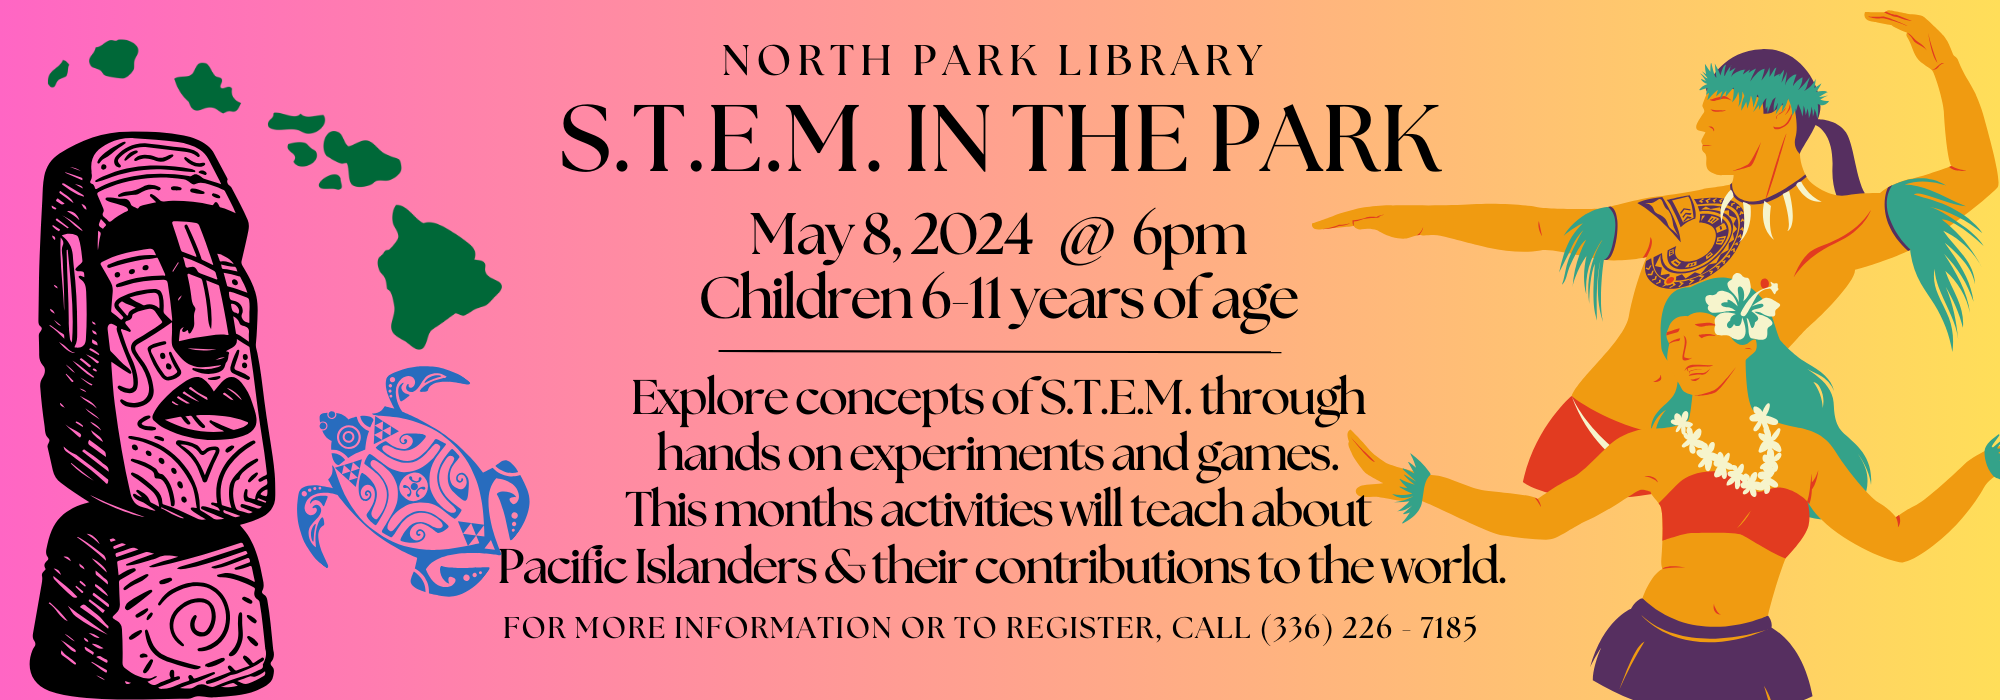 5.8 at 6 pm - Stem in the Park at North Park